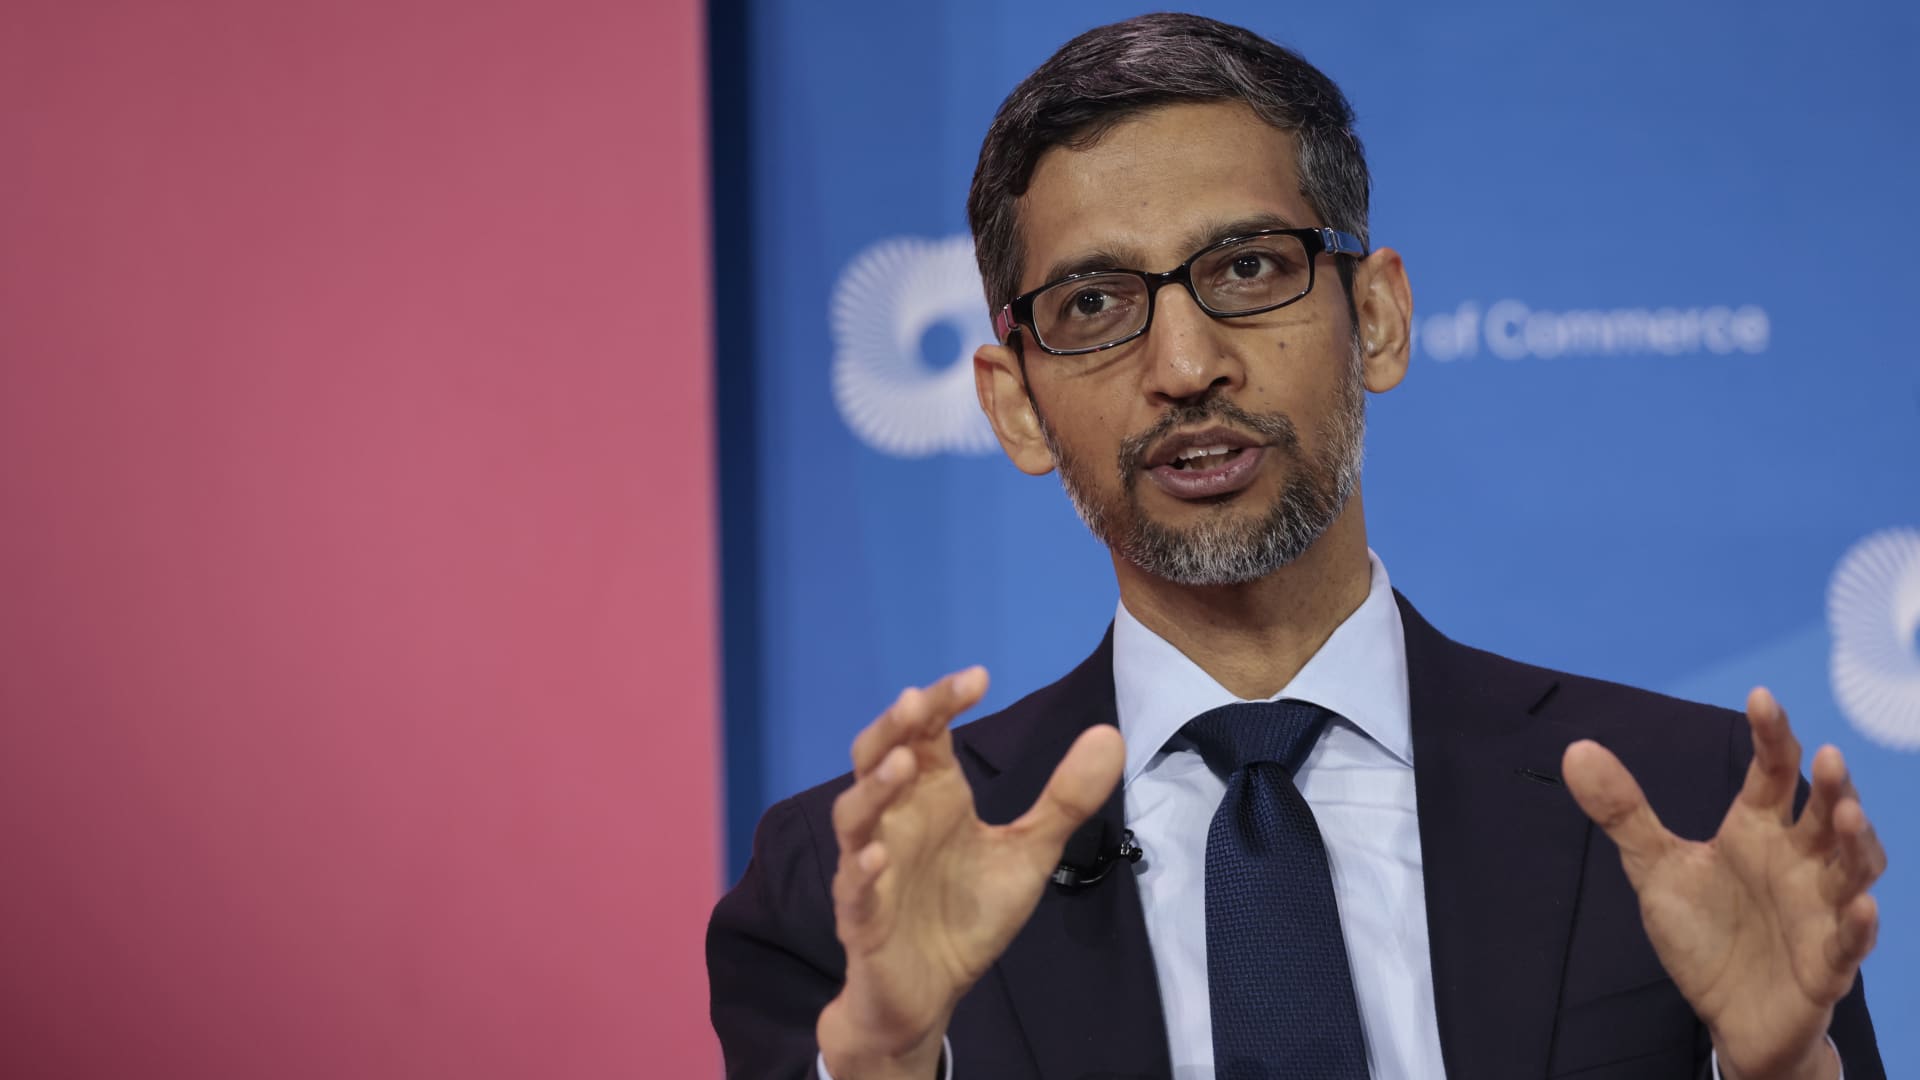 Google CEO tells employees some of company's top products 'were not first to market' as A.I. pressure mounts